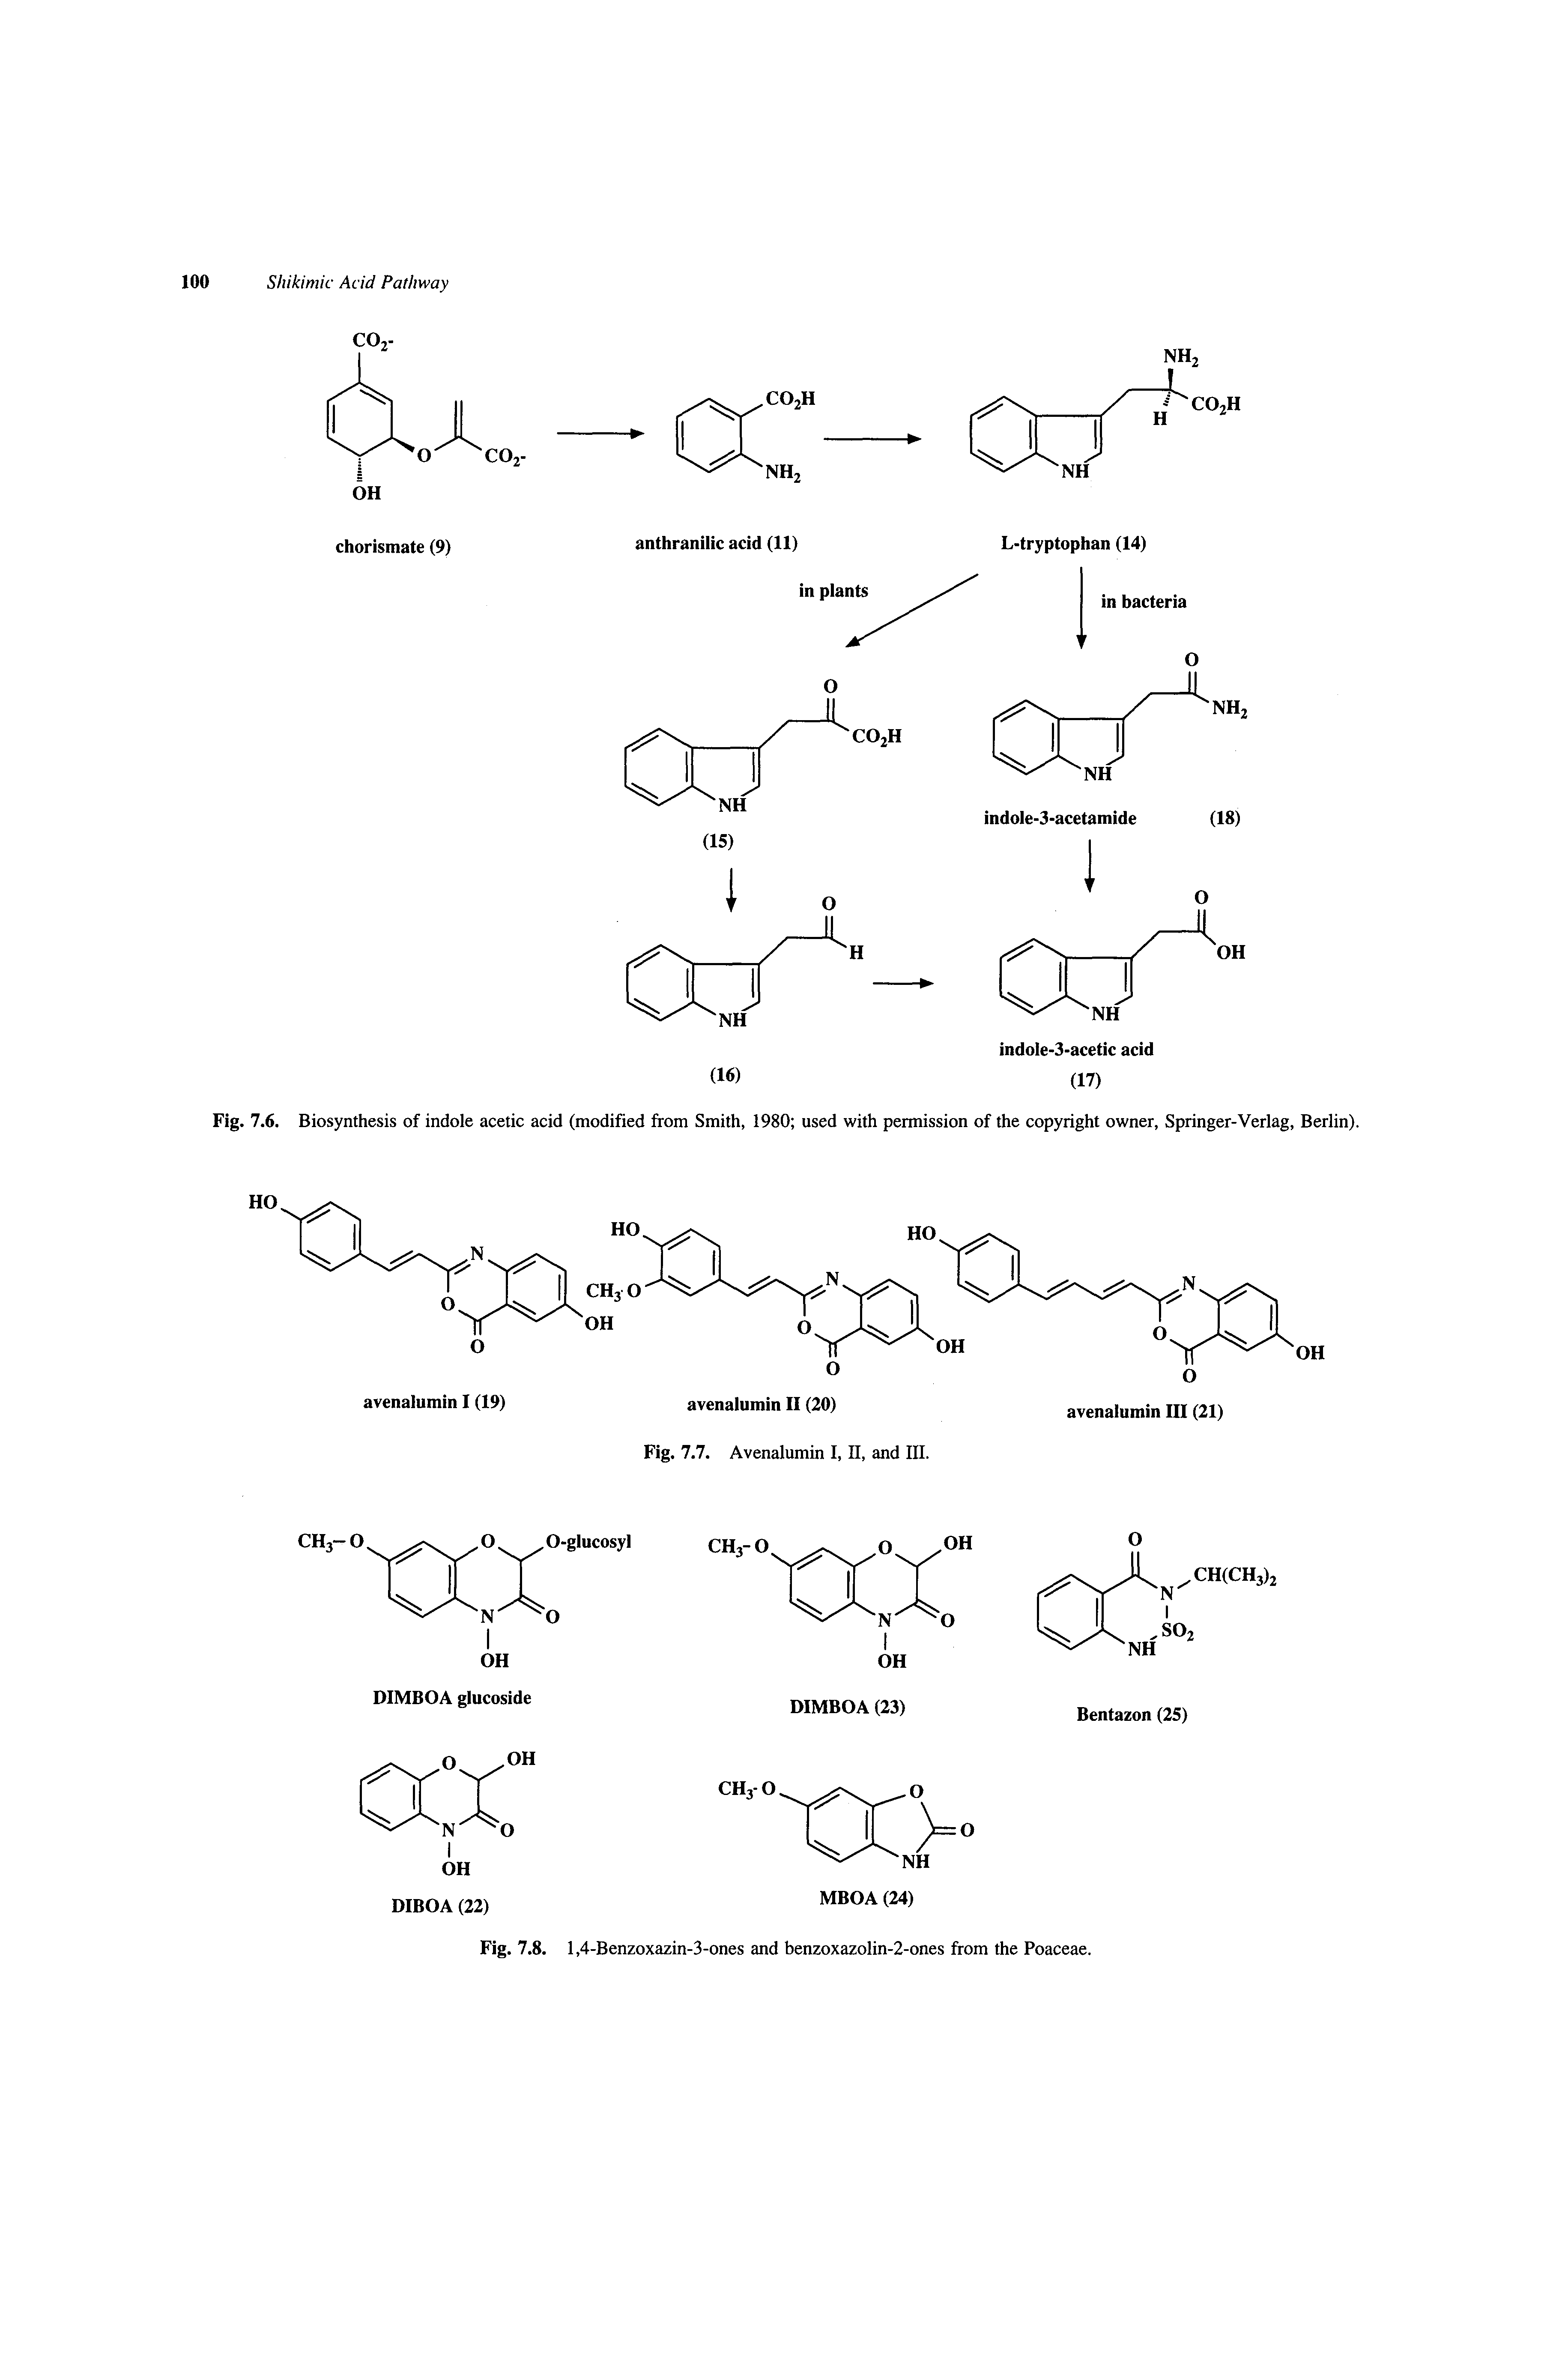 Fig. 7.6. Biosynthesis of indole acetic acid (modified from Smith, 1980 used with permission of the copyright owner, Springer-Verlag, Berlin).